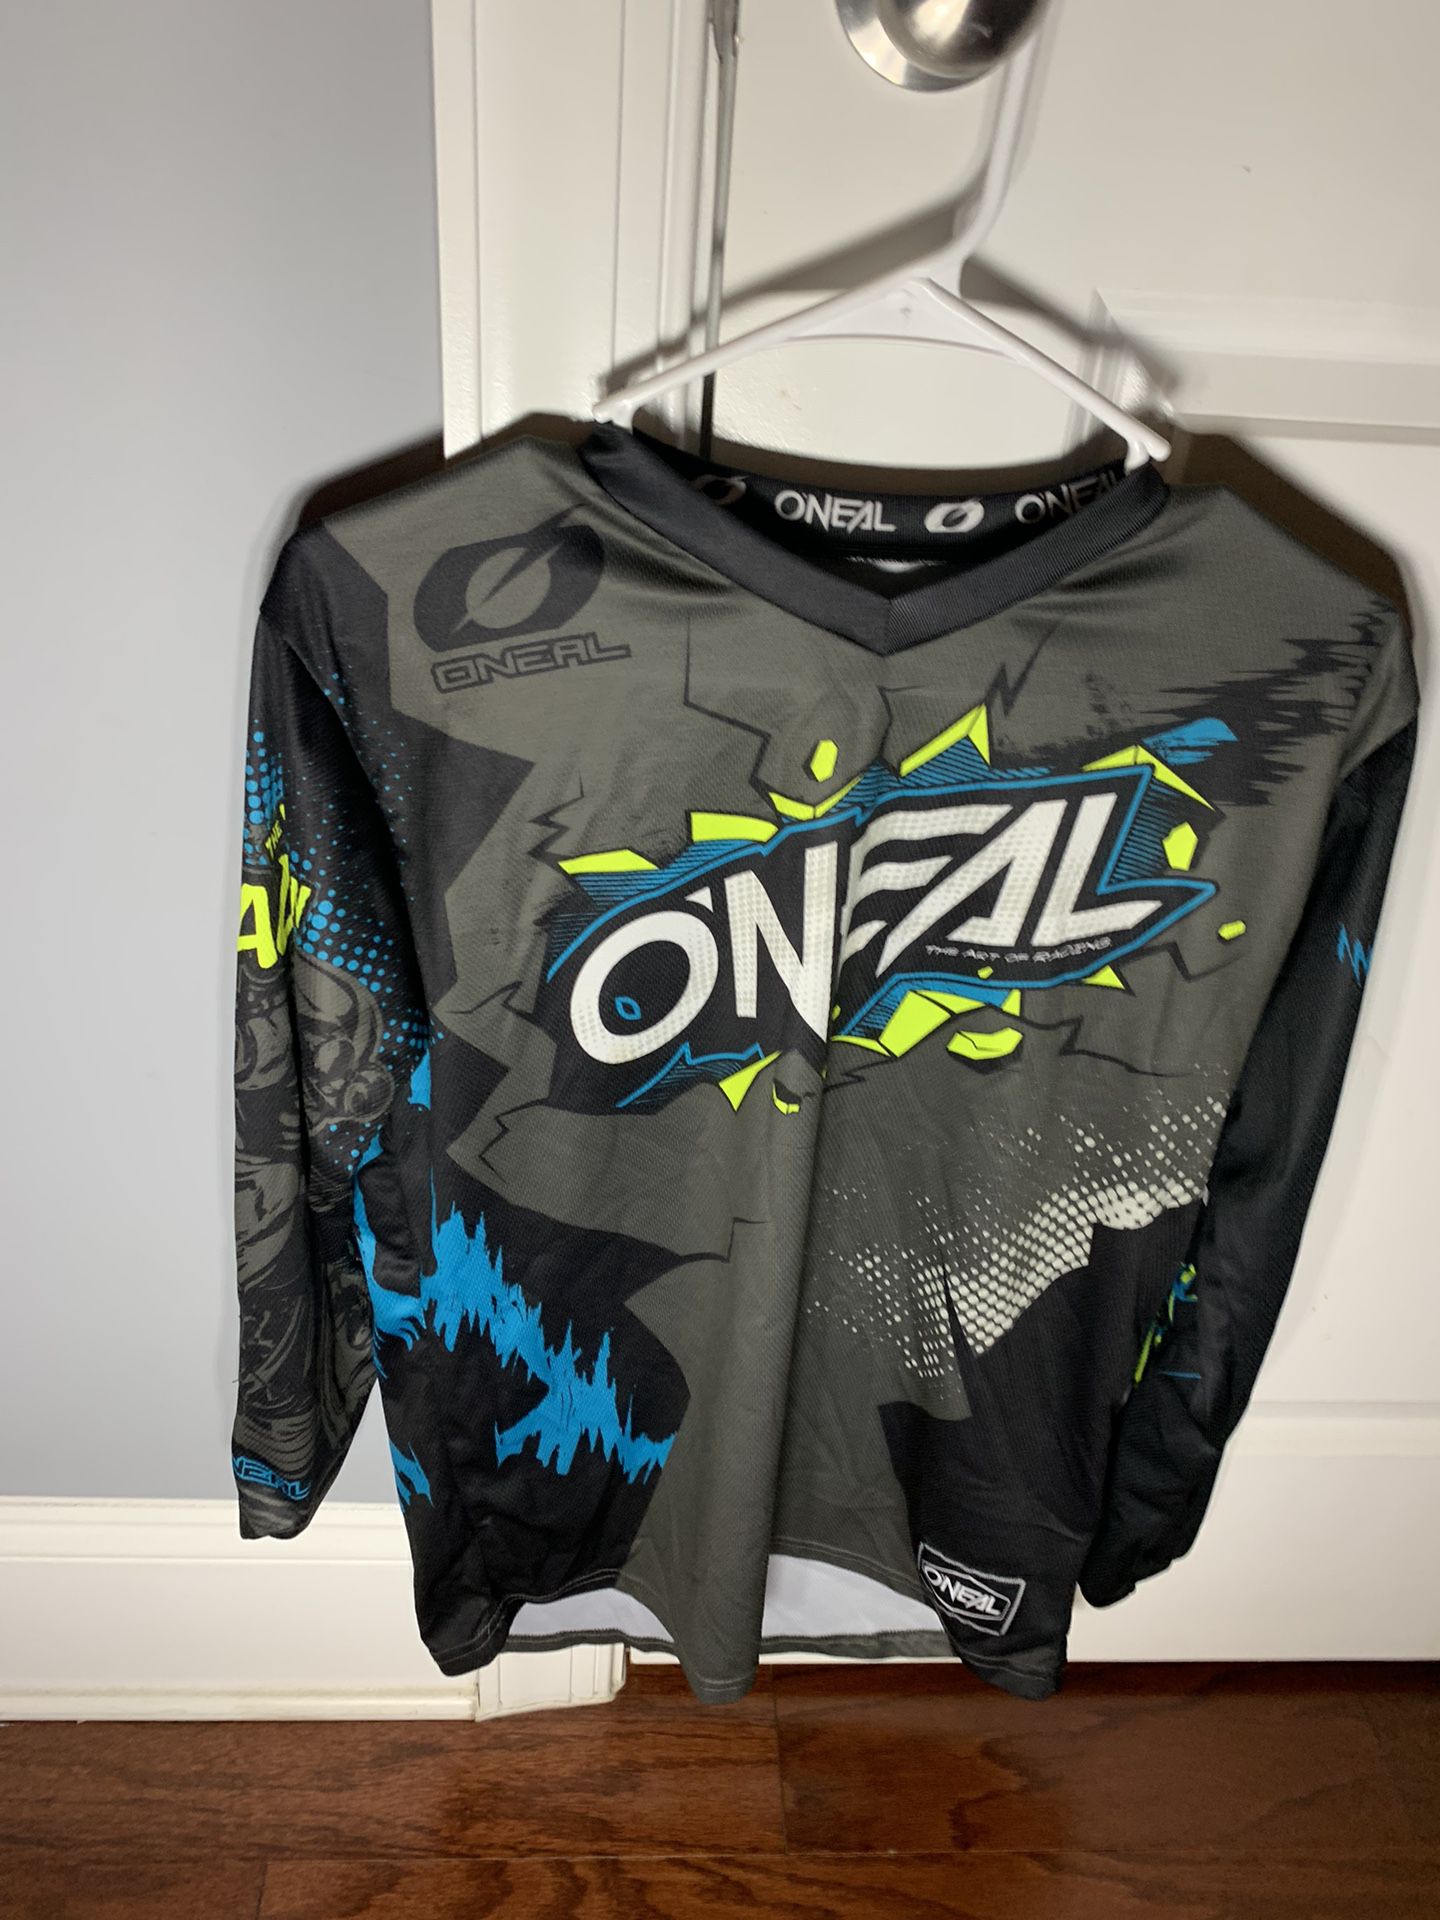 ONEAL Youth Motocross Jersey - Youth XL. 